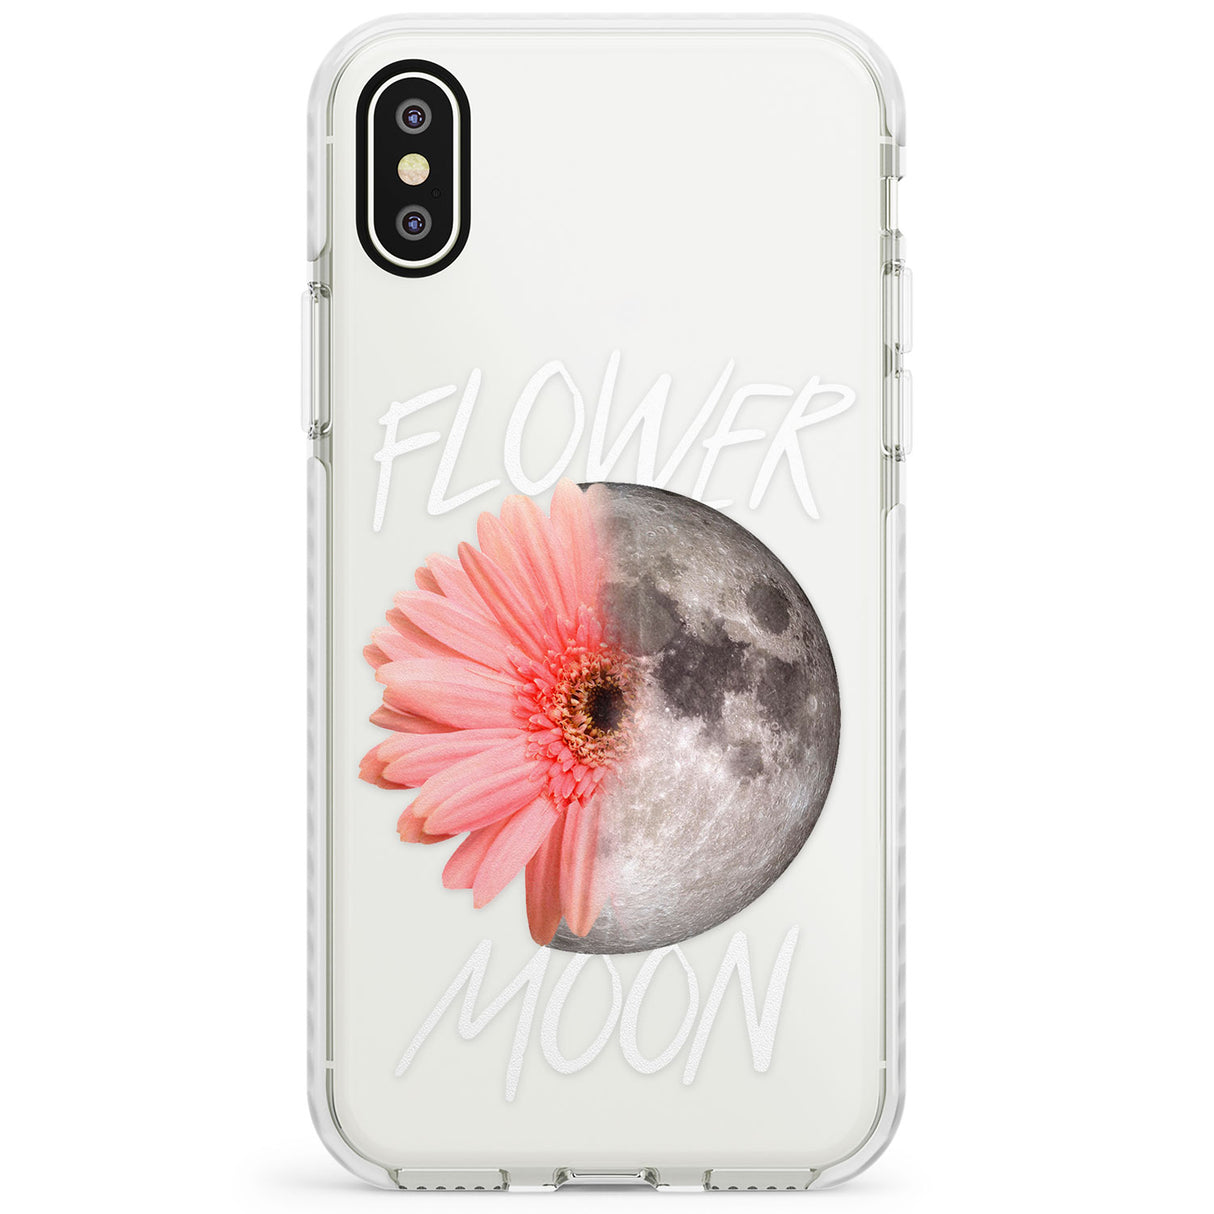 Flower Moon Impact Phone Case for iPhone X XS Max XR